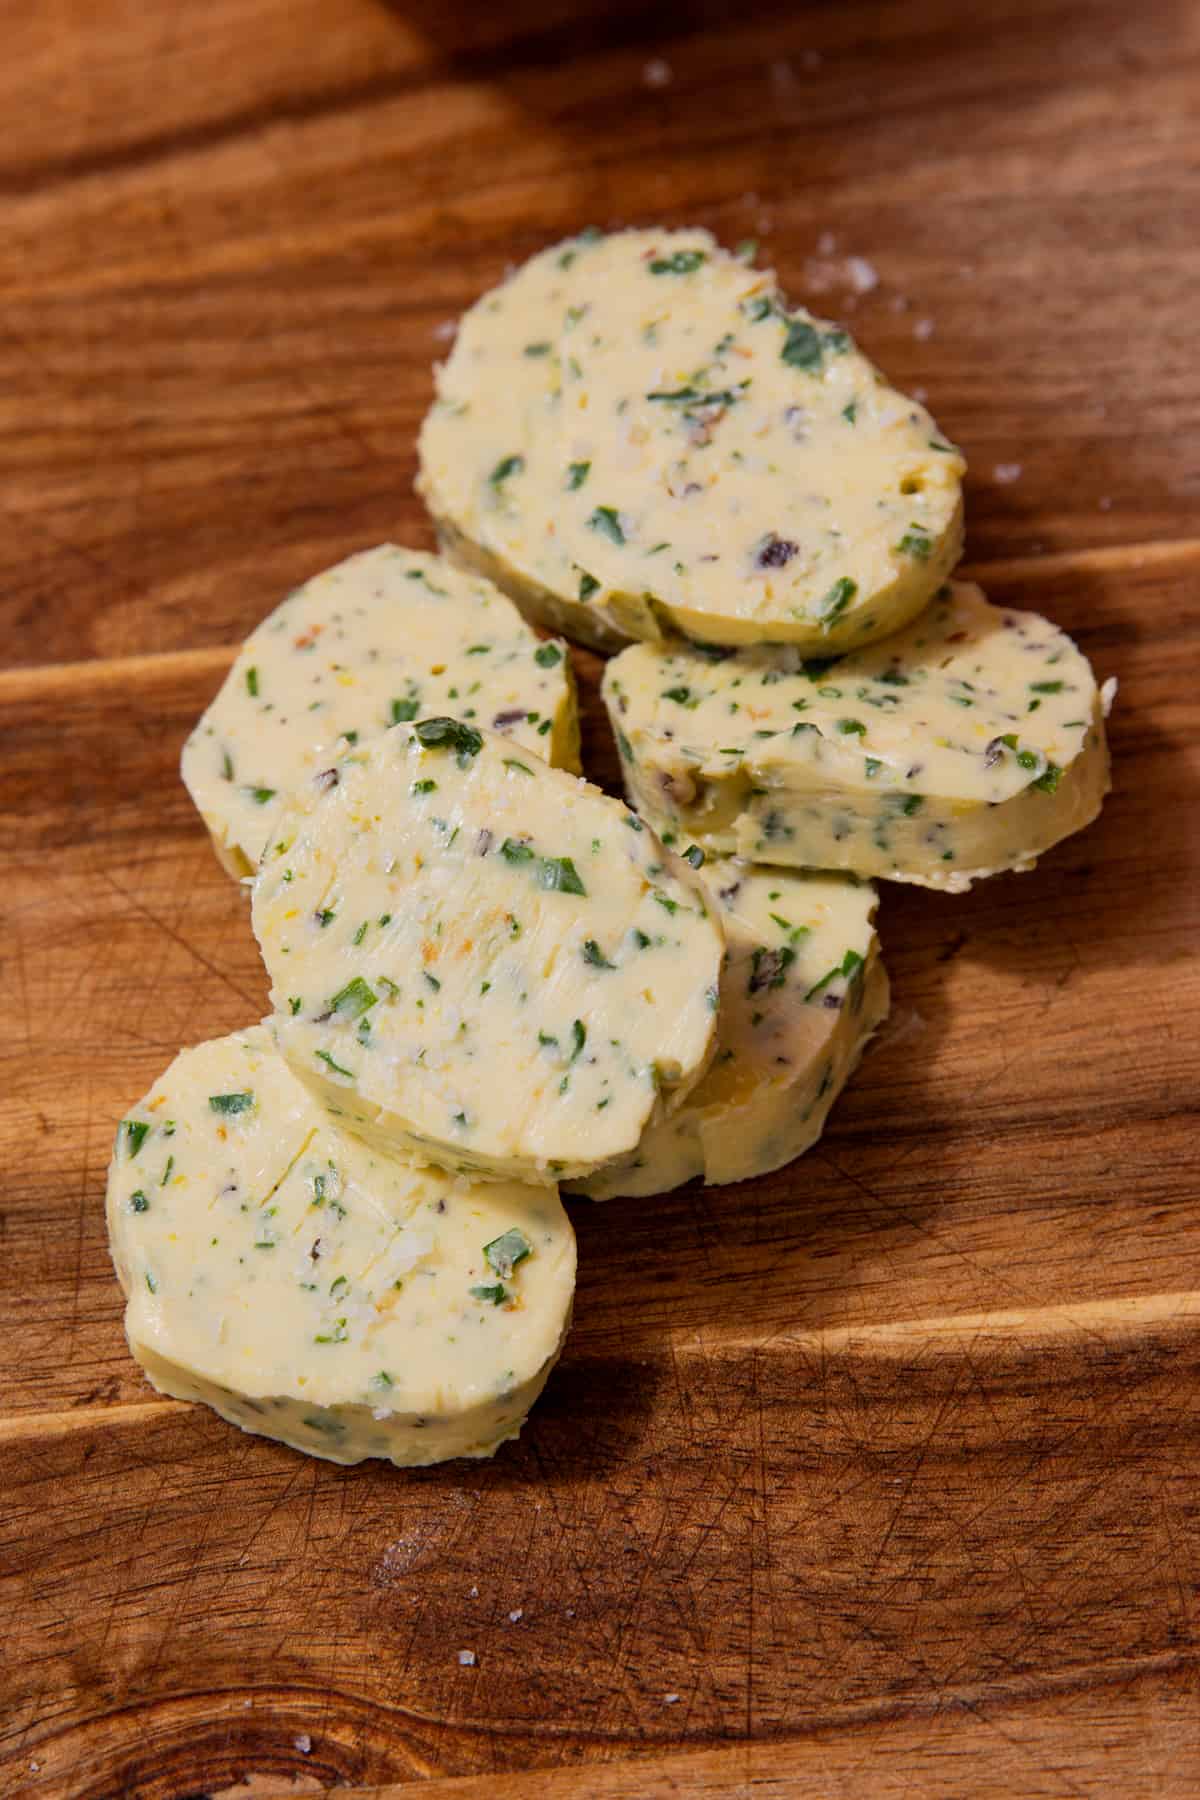 Rouns aof herby butter piled on each other on a wooden chopping board.